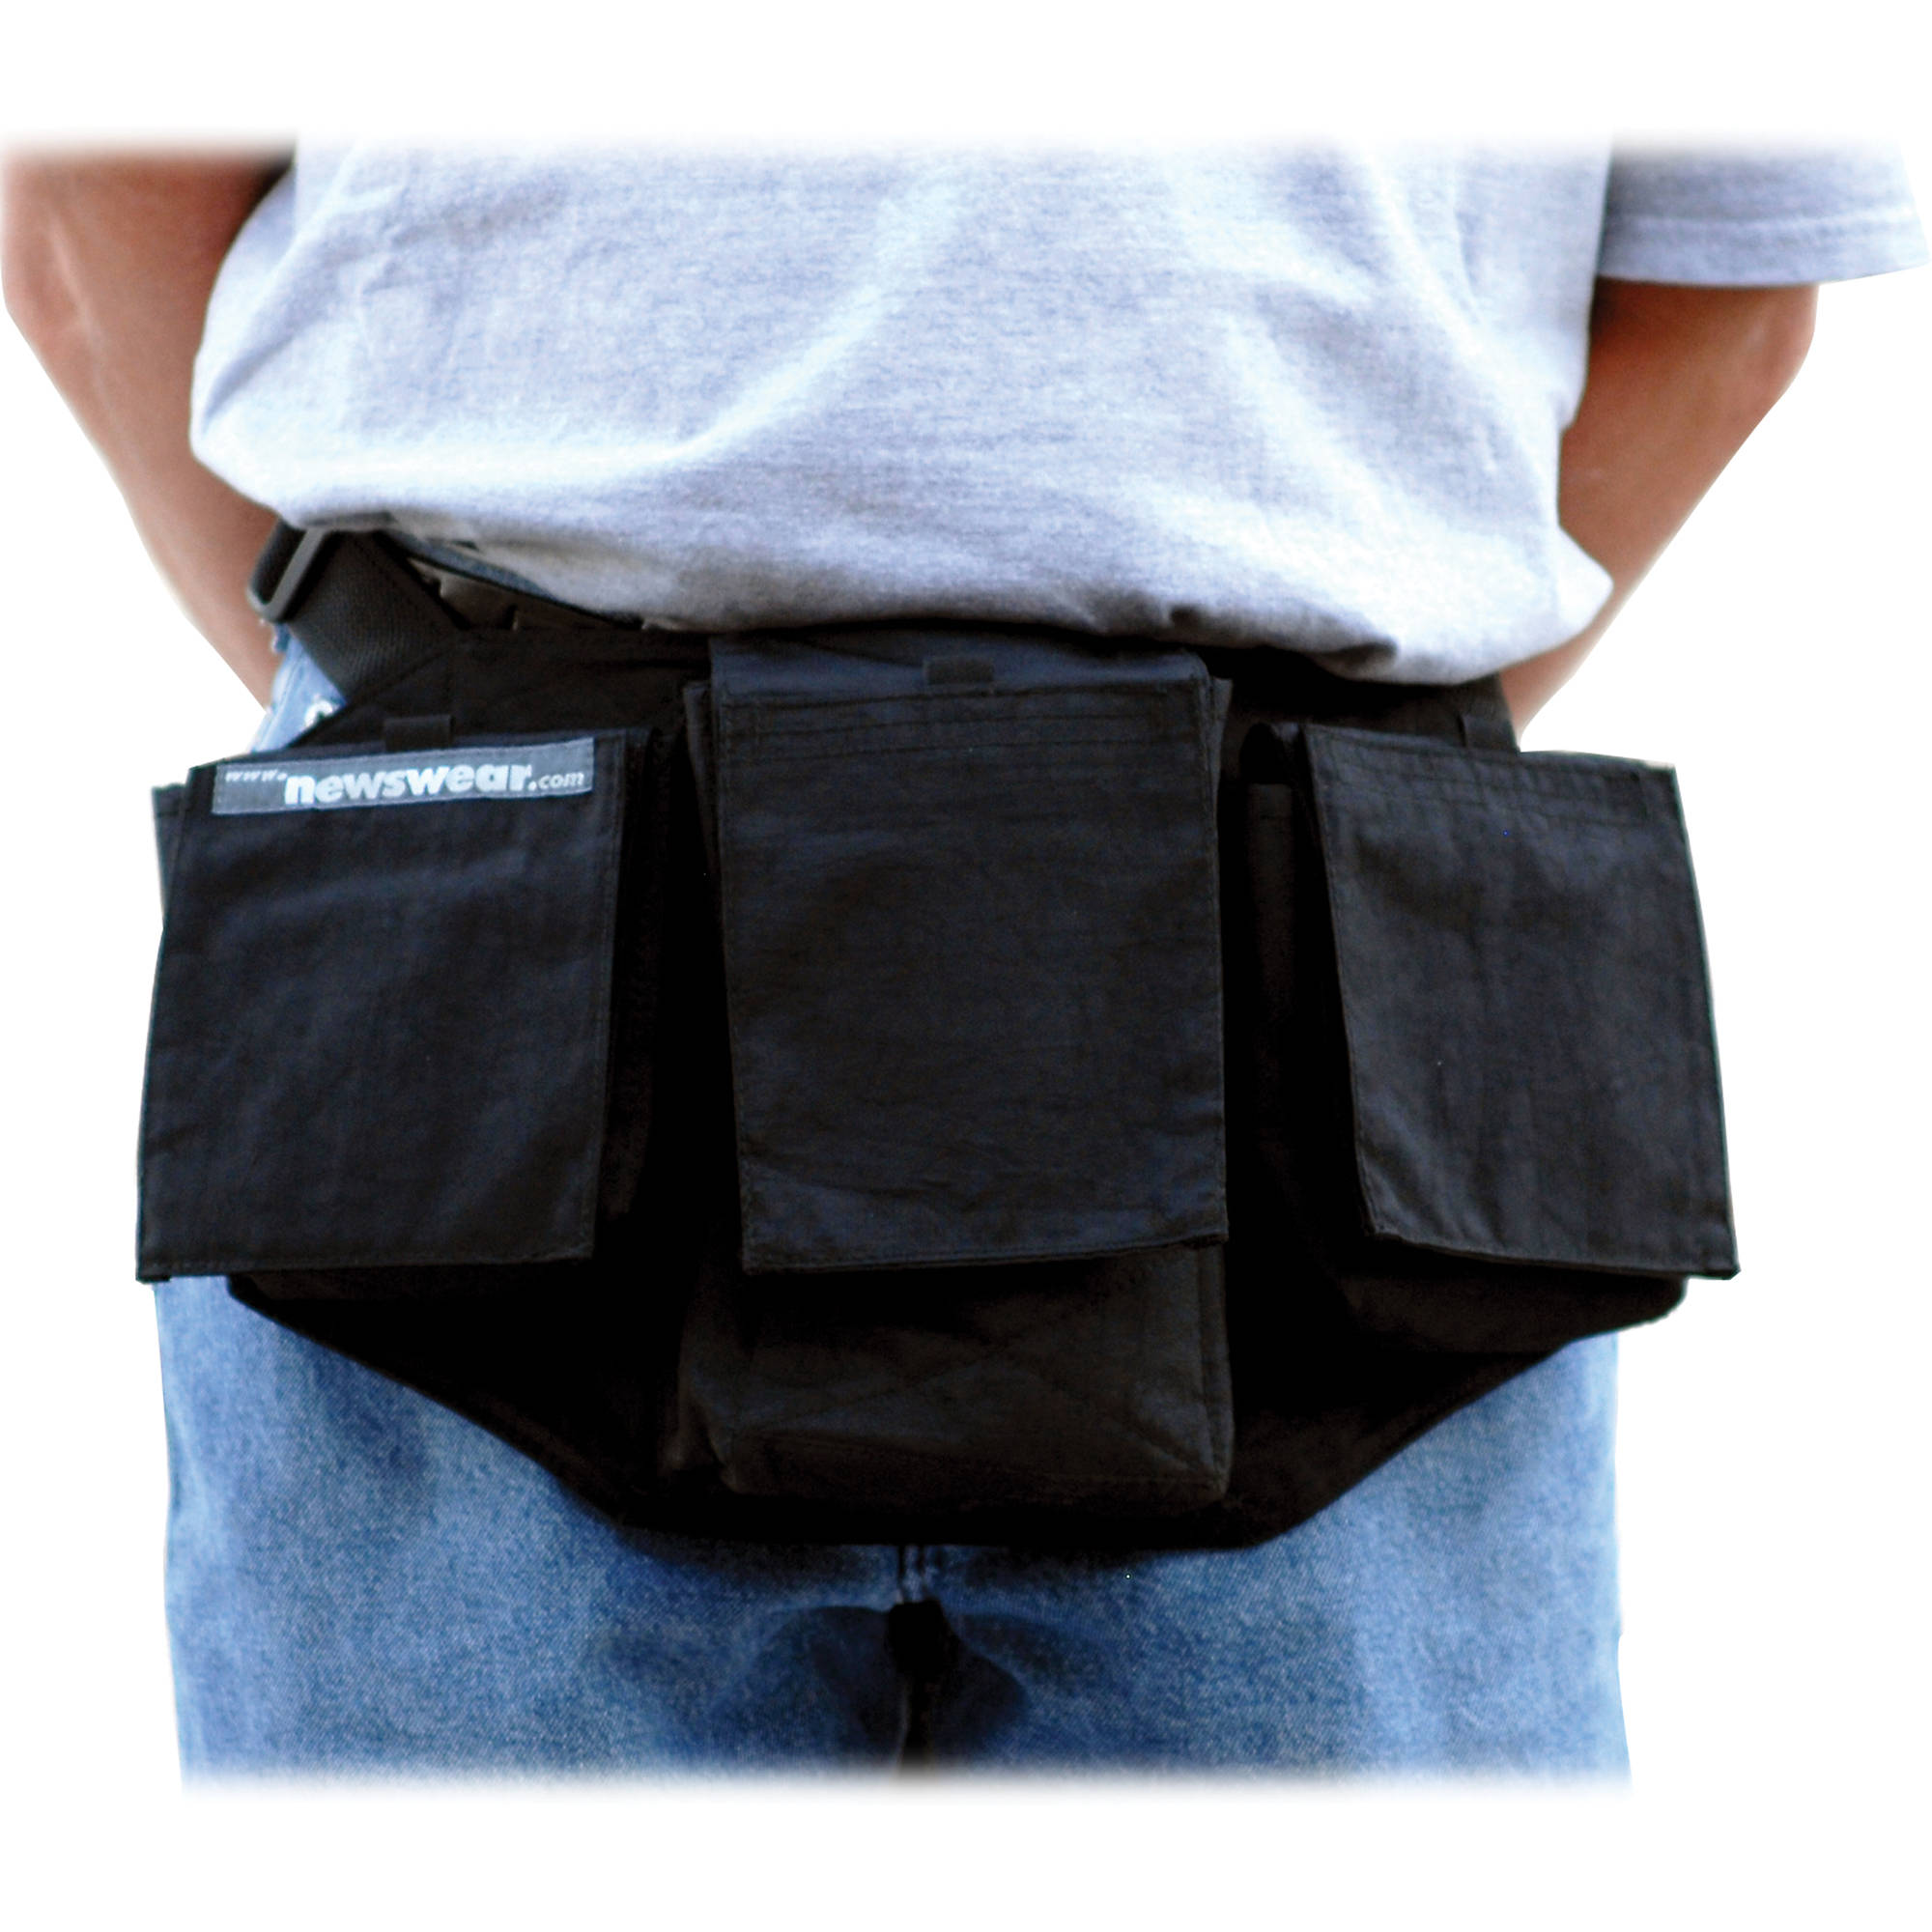 TThumbnail image for NEWSWEAR LARGE FANNY PACK